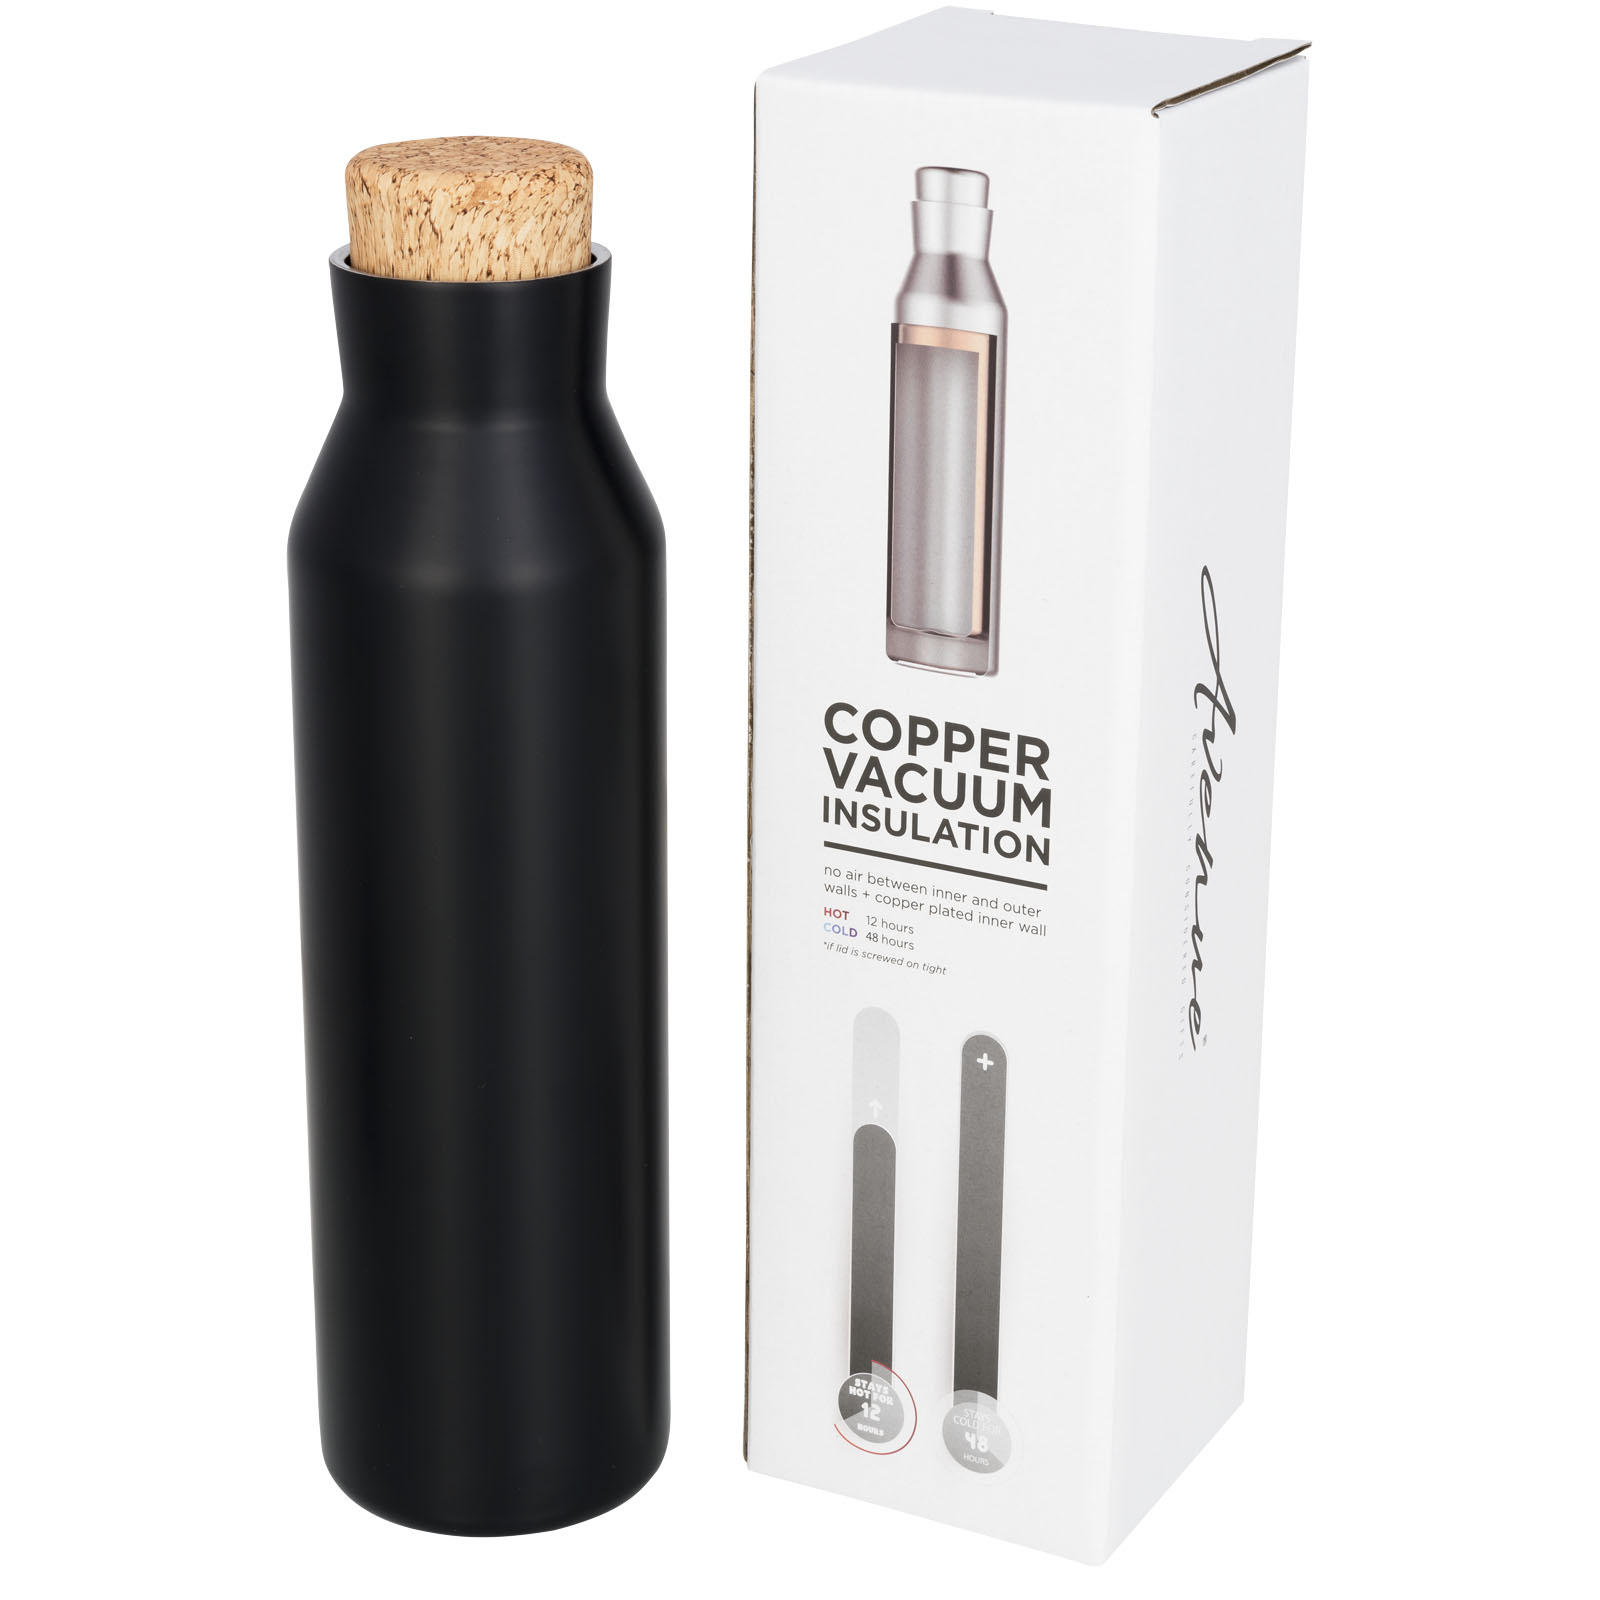 Insulated bottles - Norse 590 ml copper vacuum insulated bottle